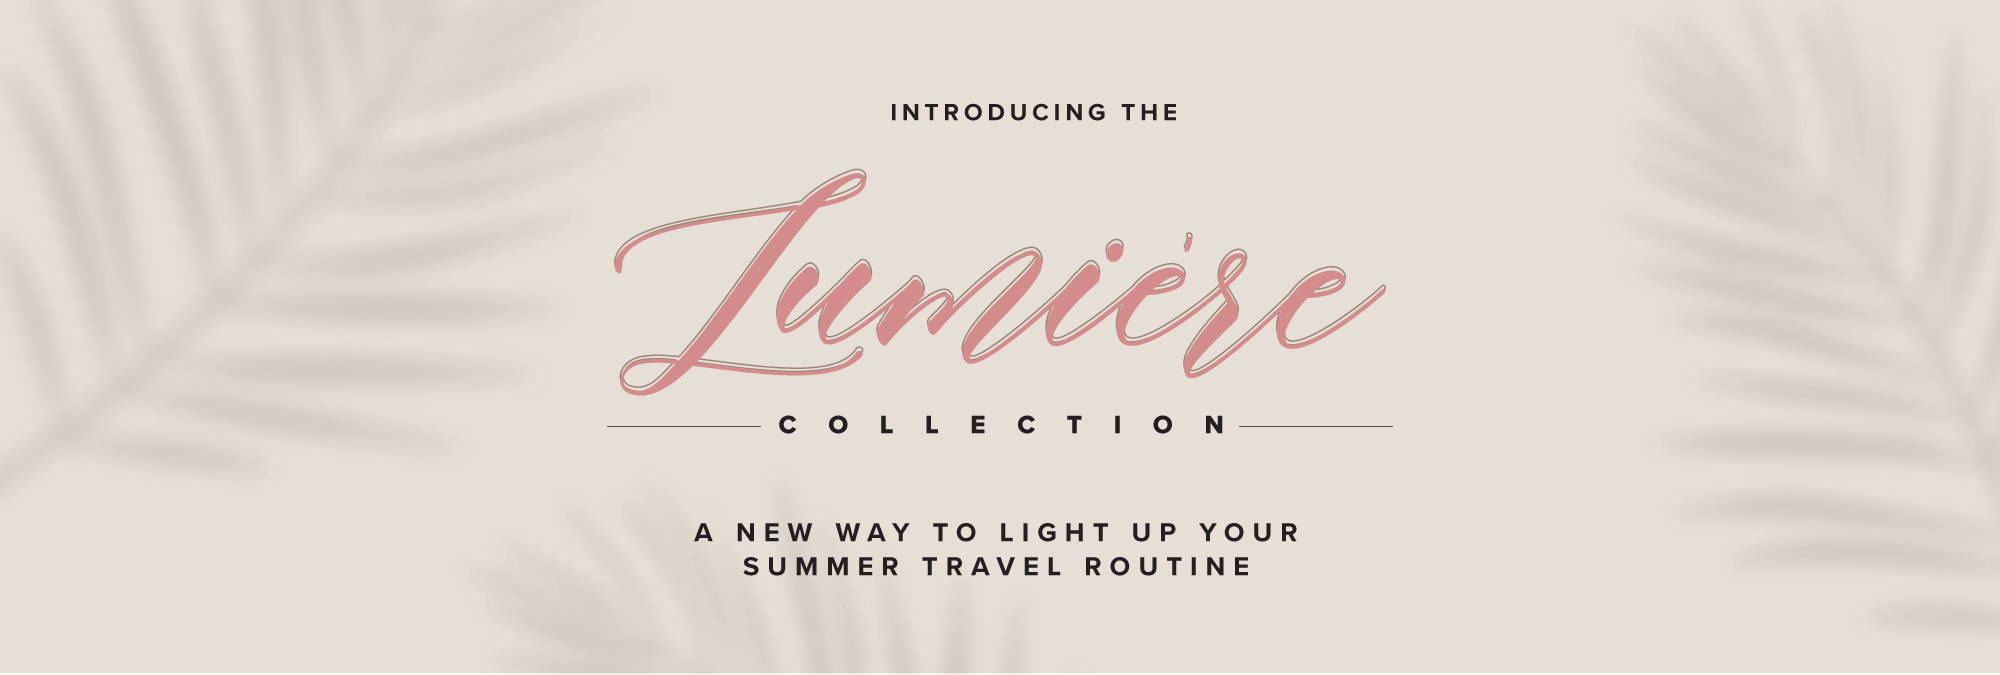 Introducing the Lumiere Collection A new way to light up your summer travel routine. Banner design with palm tree shadows. 